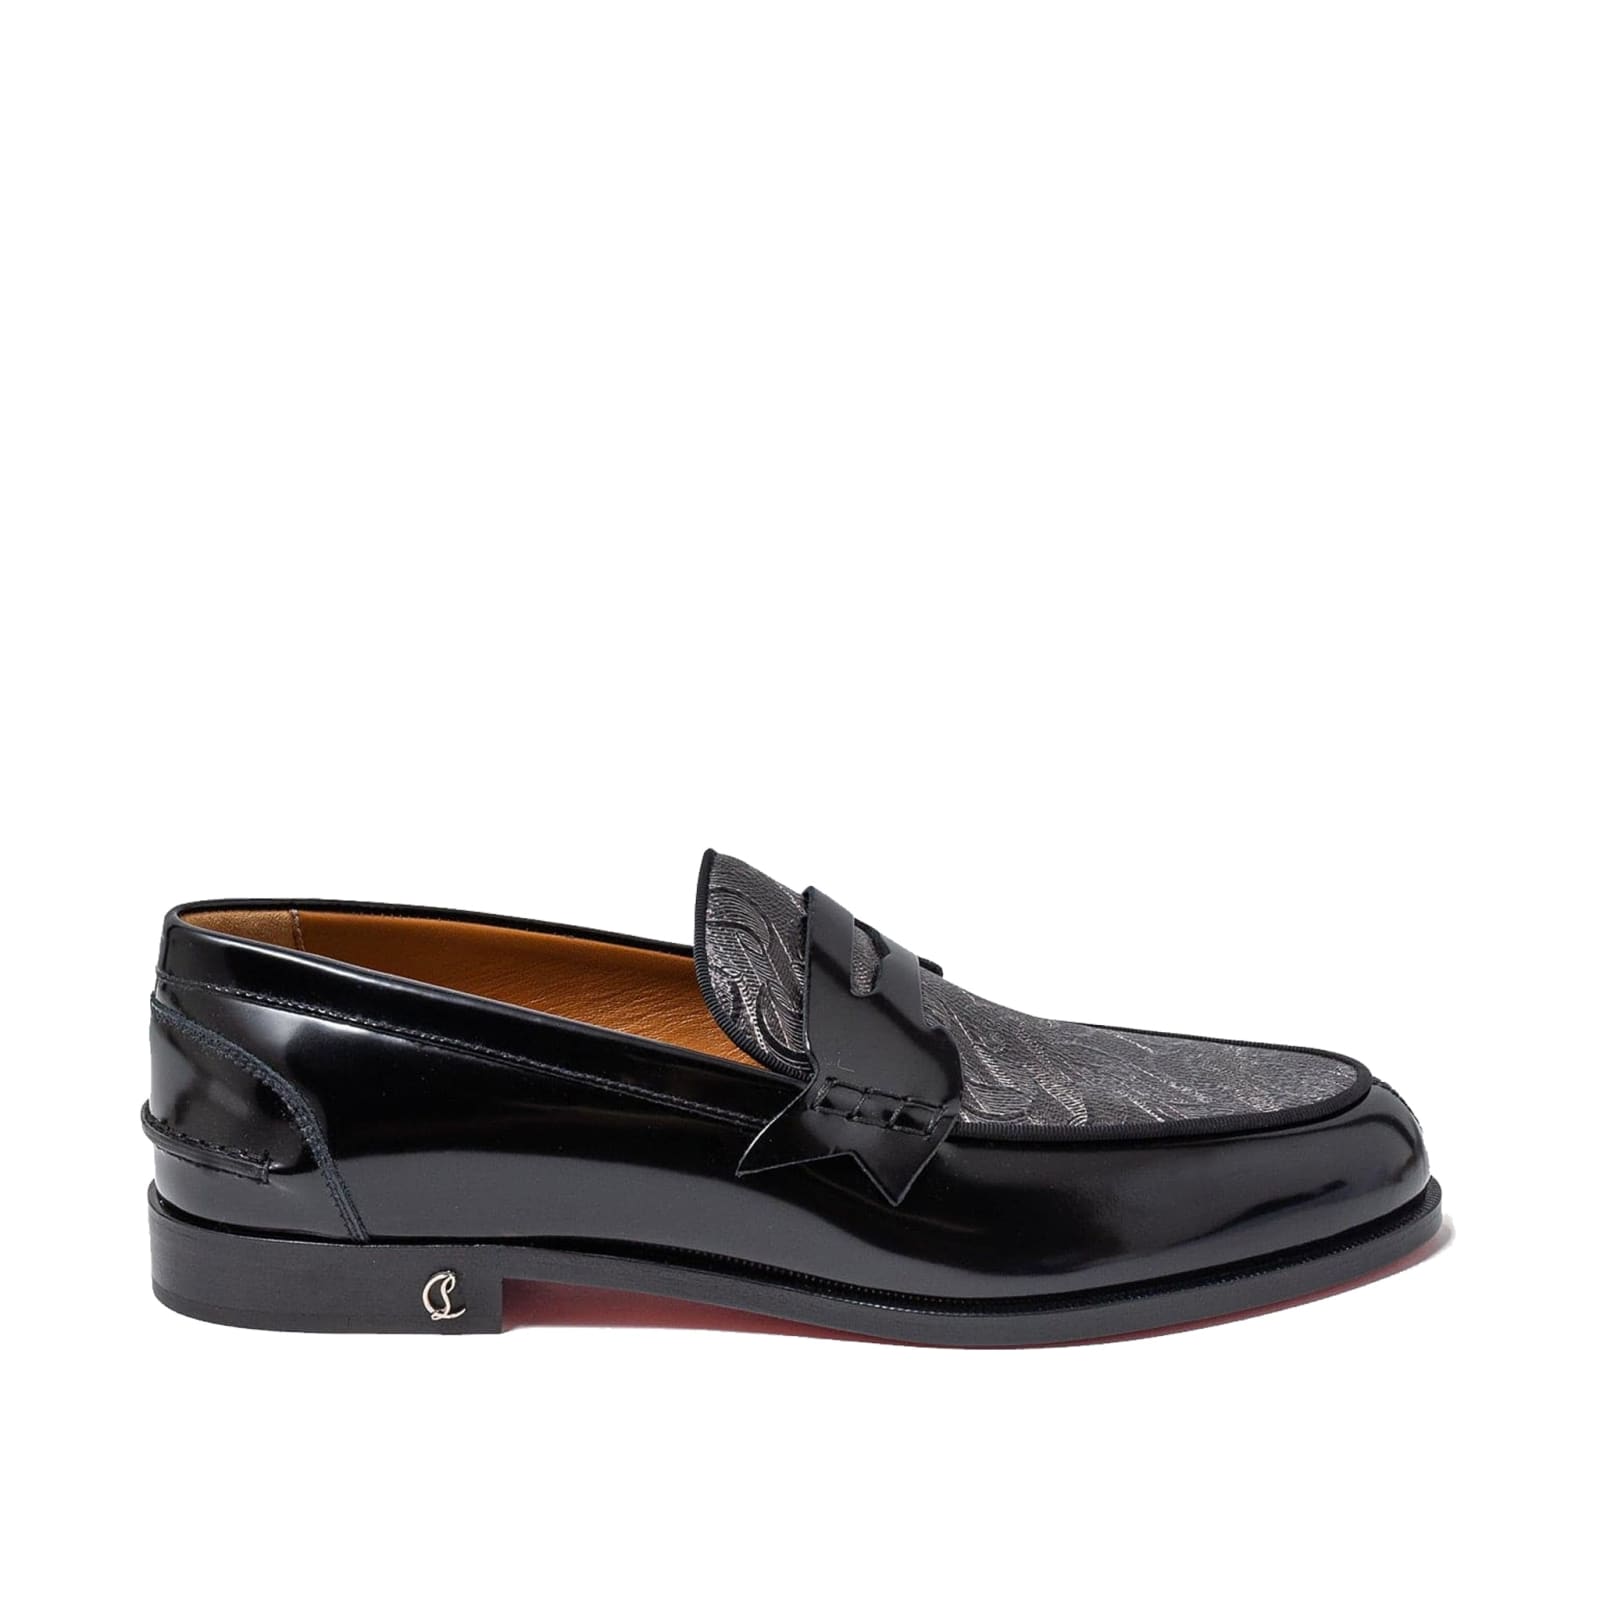 Christian Louboutin Leather Loafers